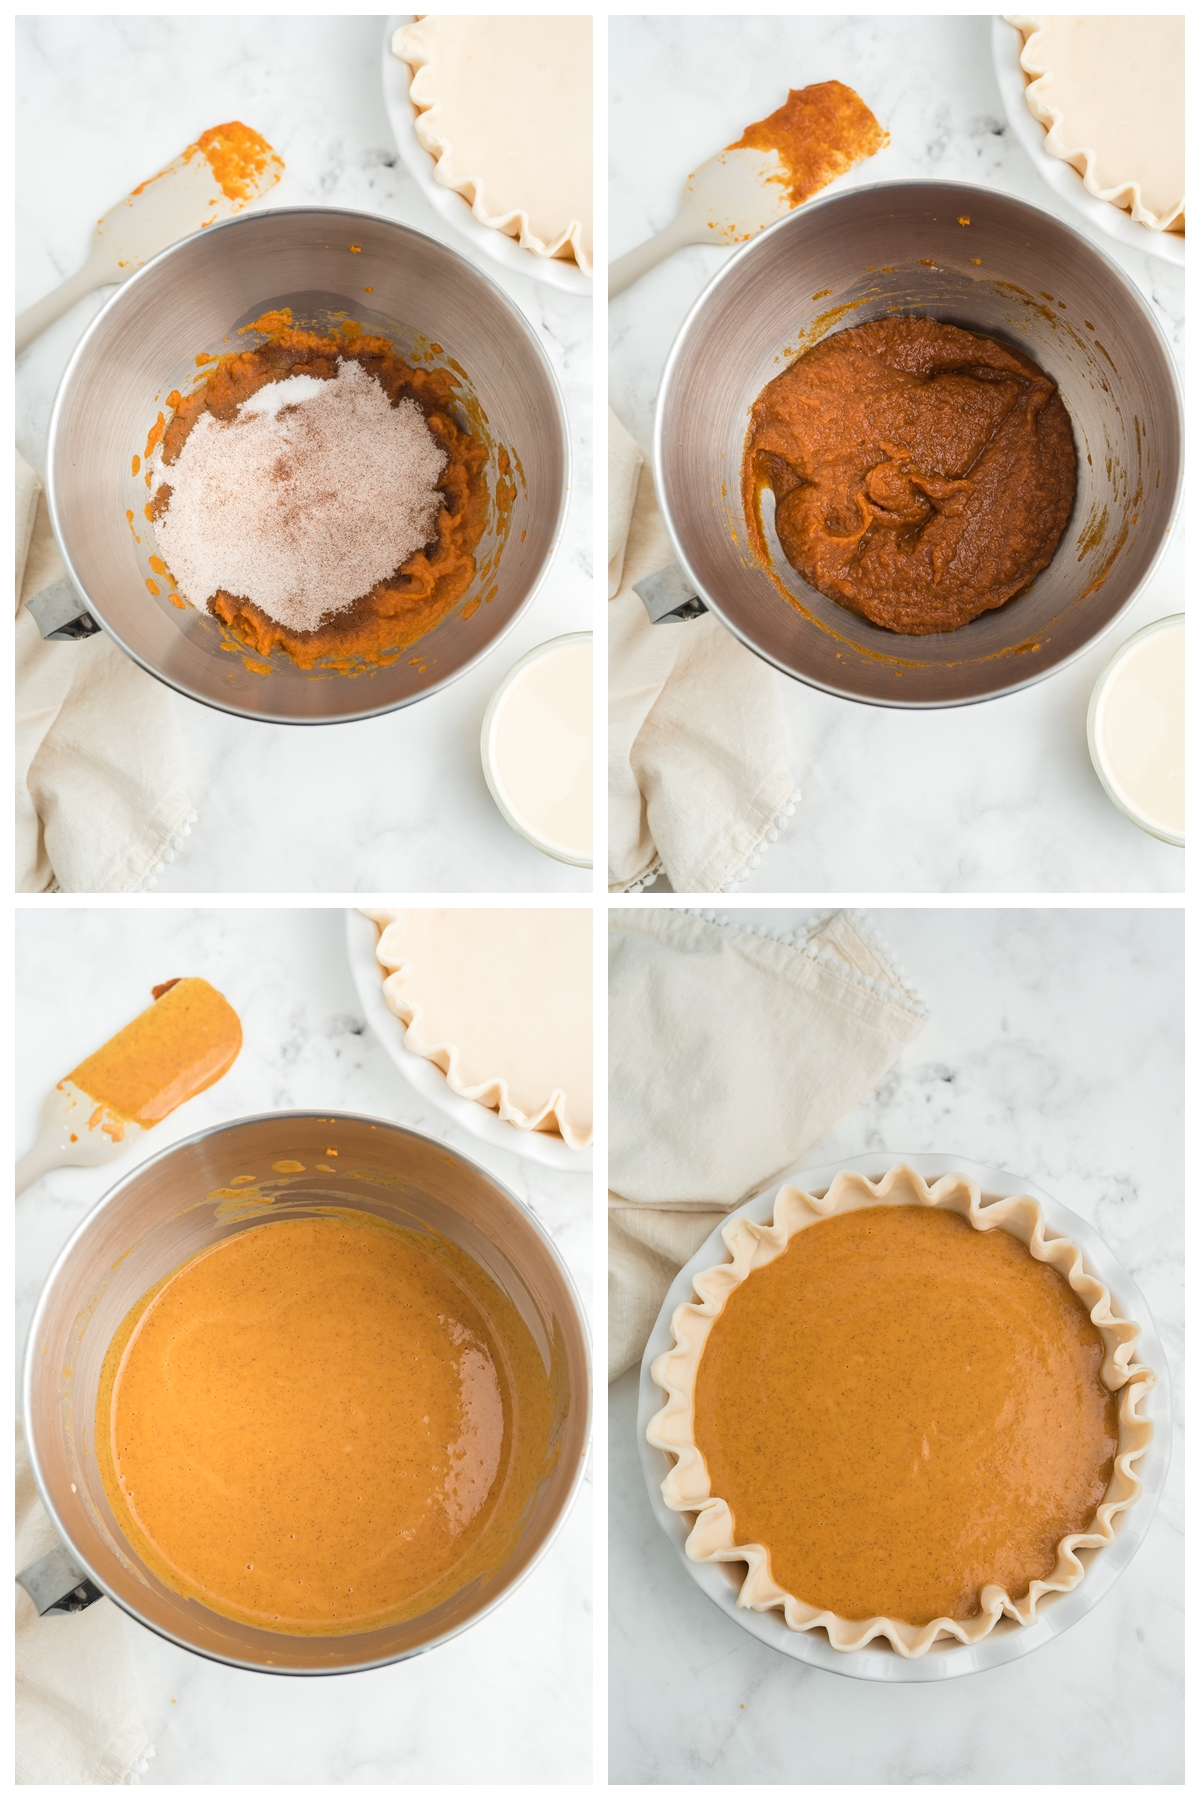 Procedure of making a classic pumpkin pie. Mixing all ingredients in a bowl until 